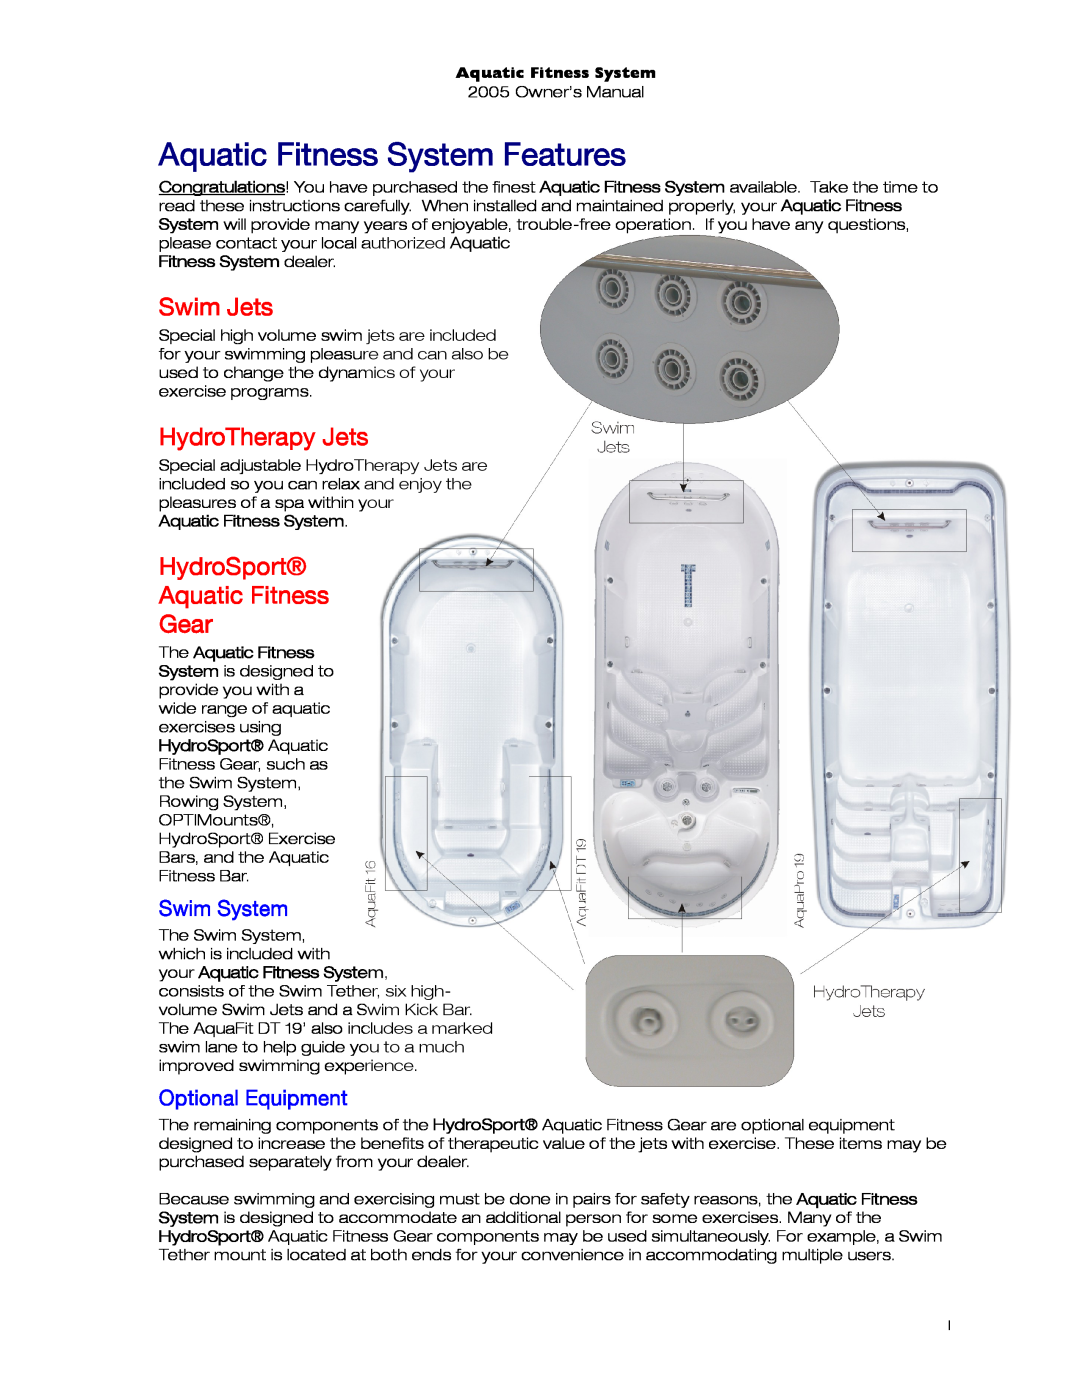 Dimension One Spas 01513-192 manual Aquatic Fitness System Features, Swim Jets, HydroTherapy Jets, Swim System 